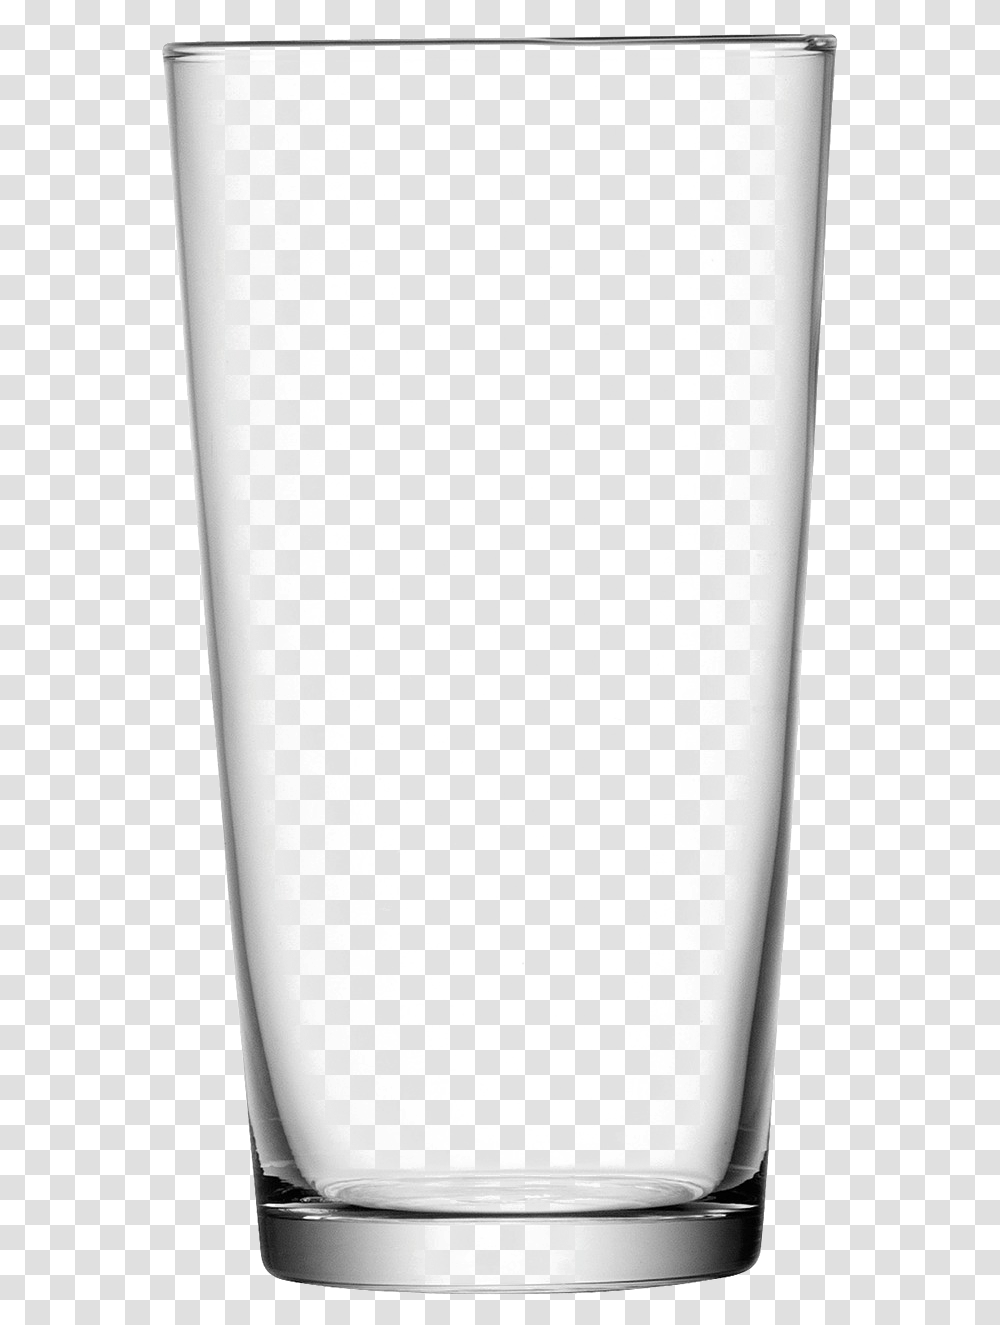 Drinking Glass File Empty Glass, Bottle, Beer Glass, Alcohol, Beverage Transparent Png